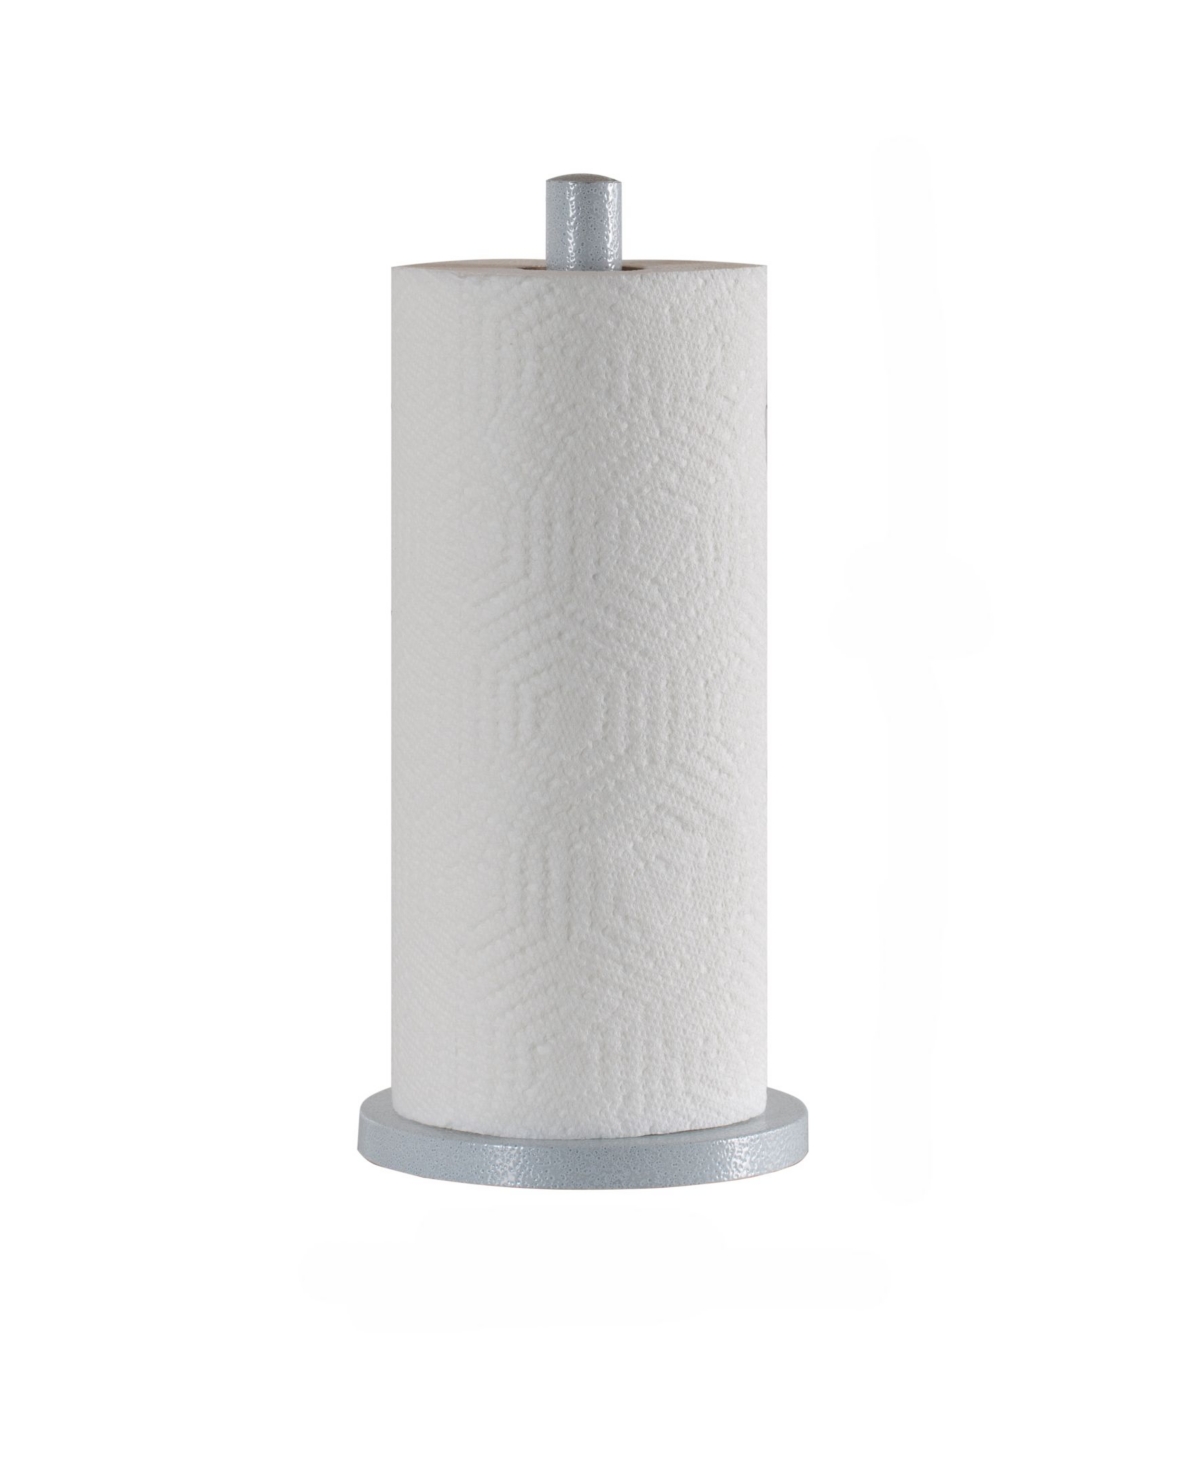 Laura Ashley Speckled Paper Towel Holder In Light Gray